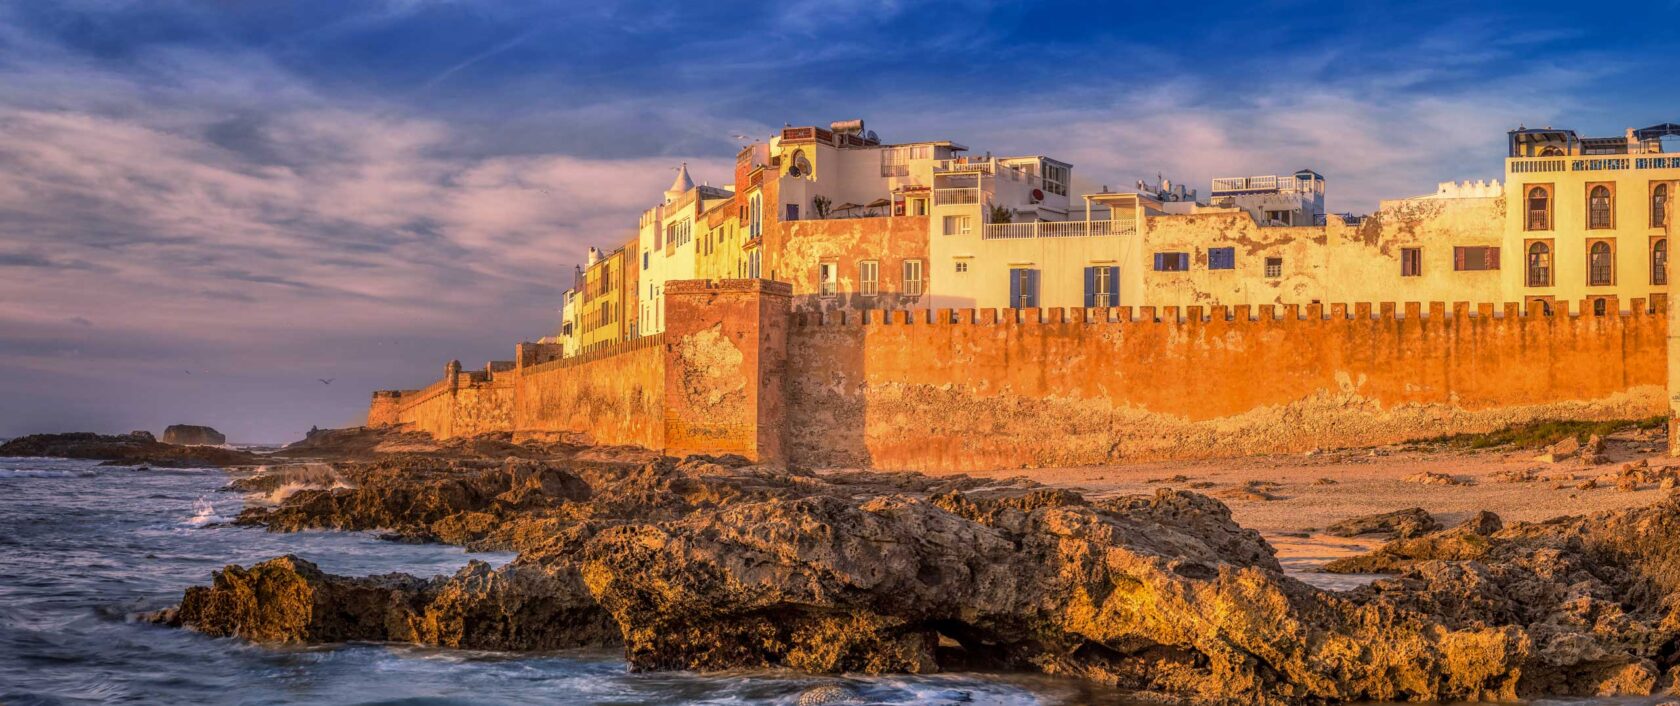 Moroccan seaside town of Essaouira with defensive fort wall.